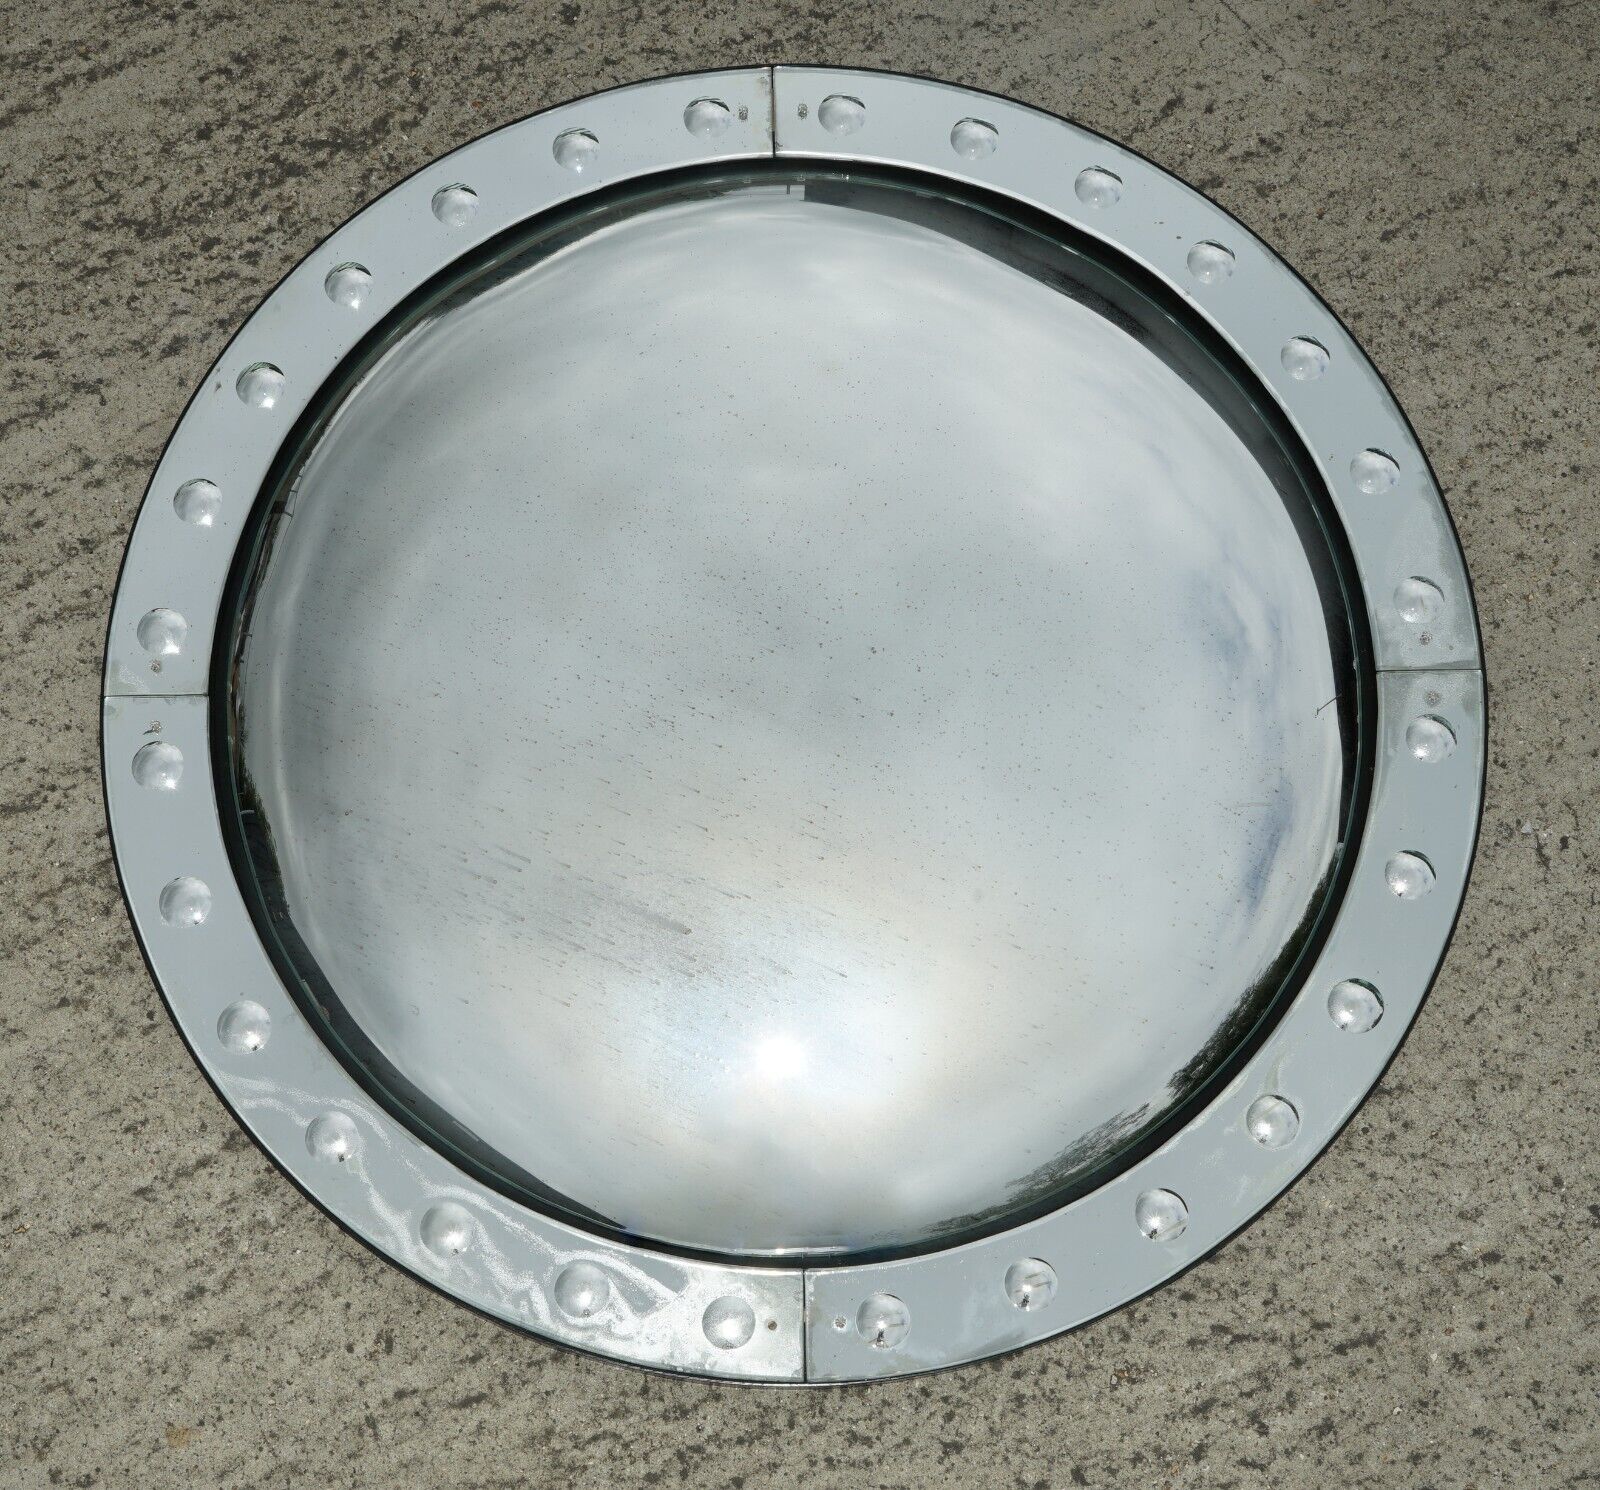 MASSIVE ROUND 136CM TALL CONVEX GLASS SORCERERS MIRROR BUTLERS WALL MIRROR